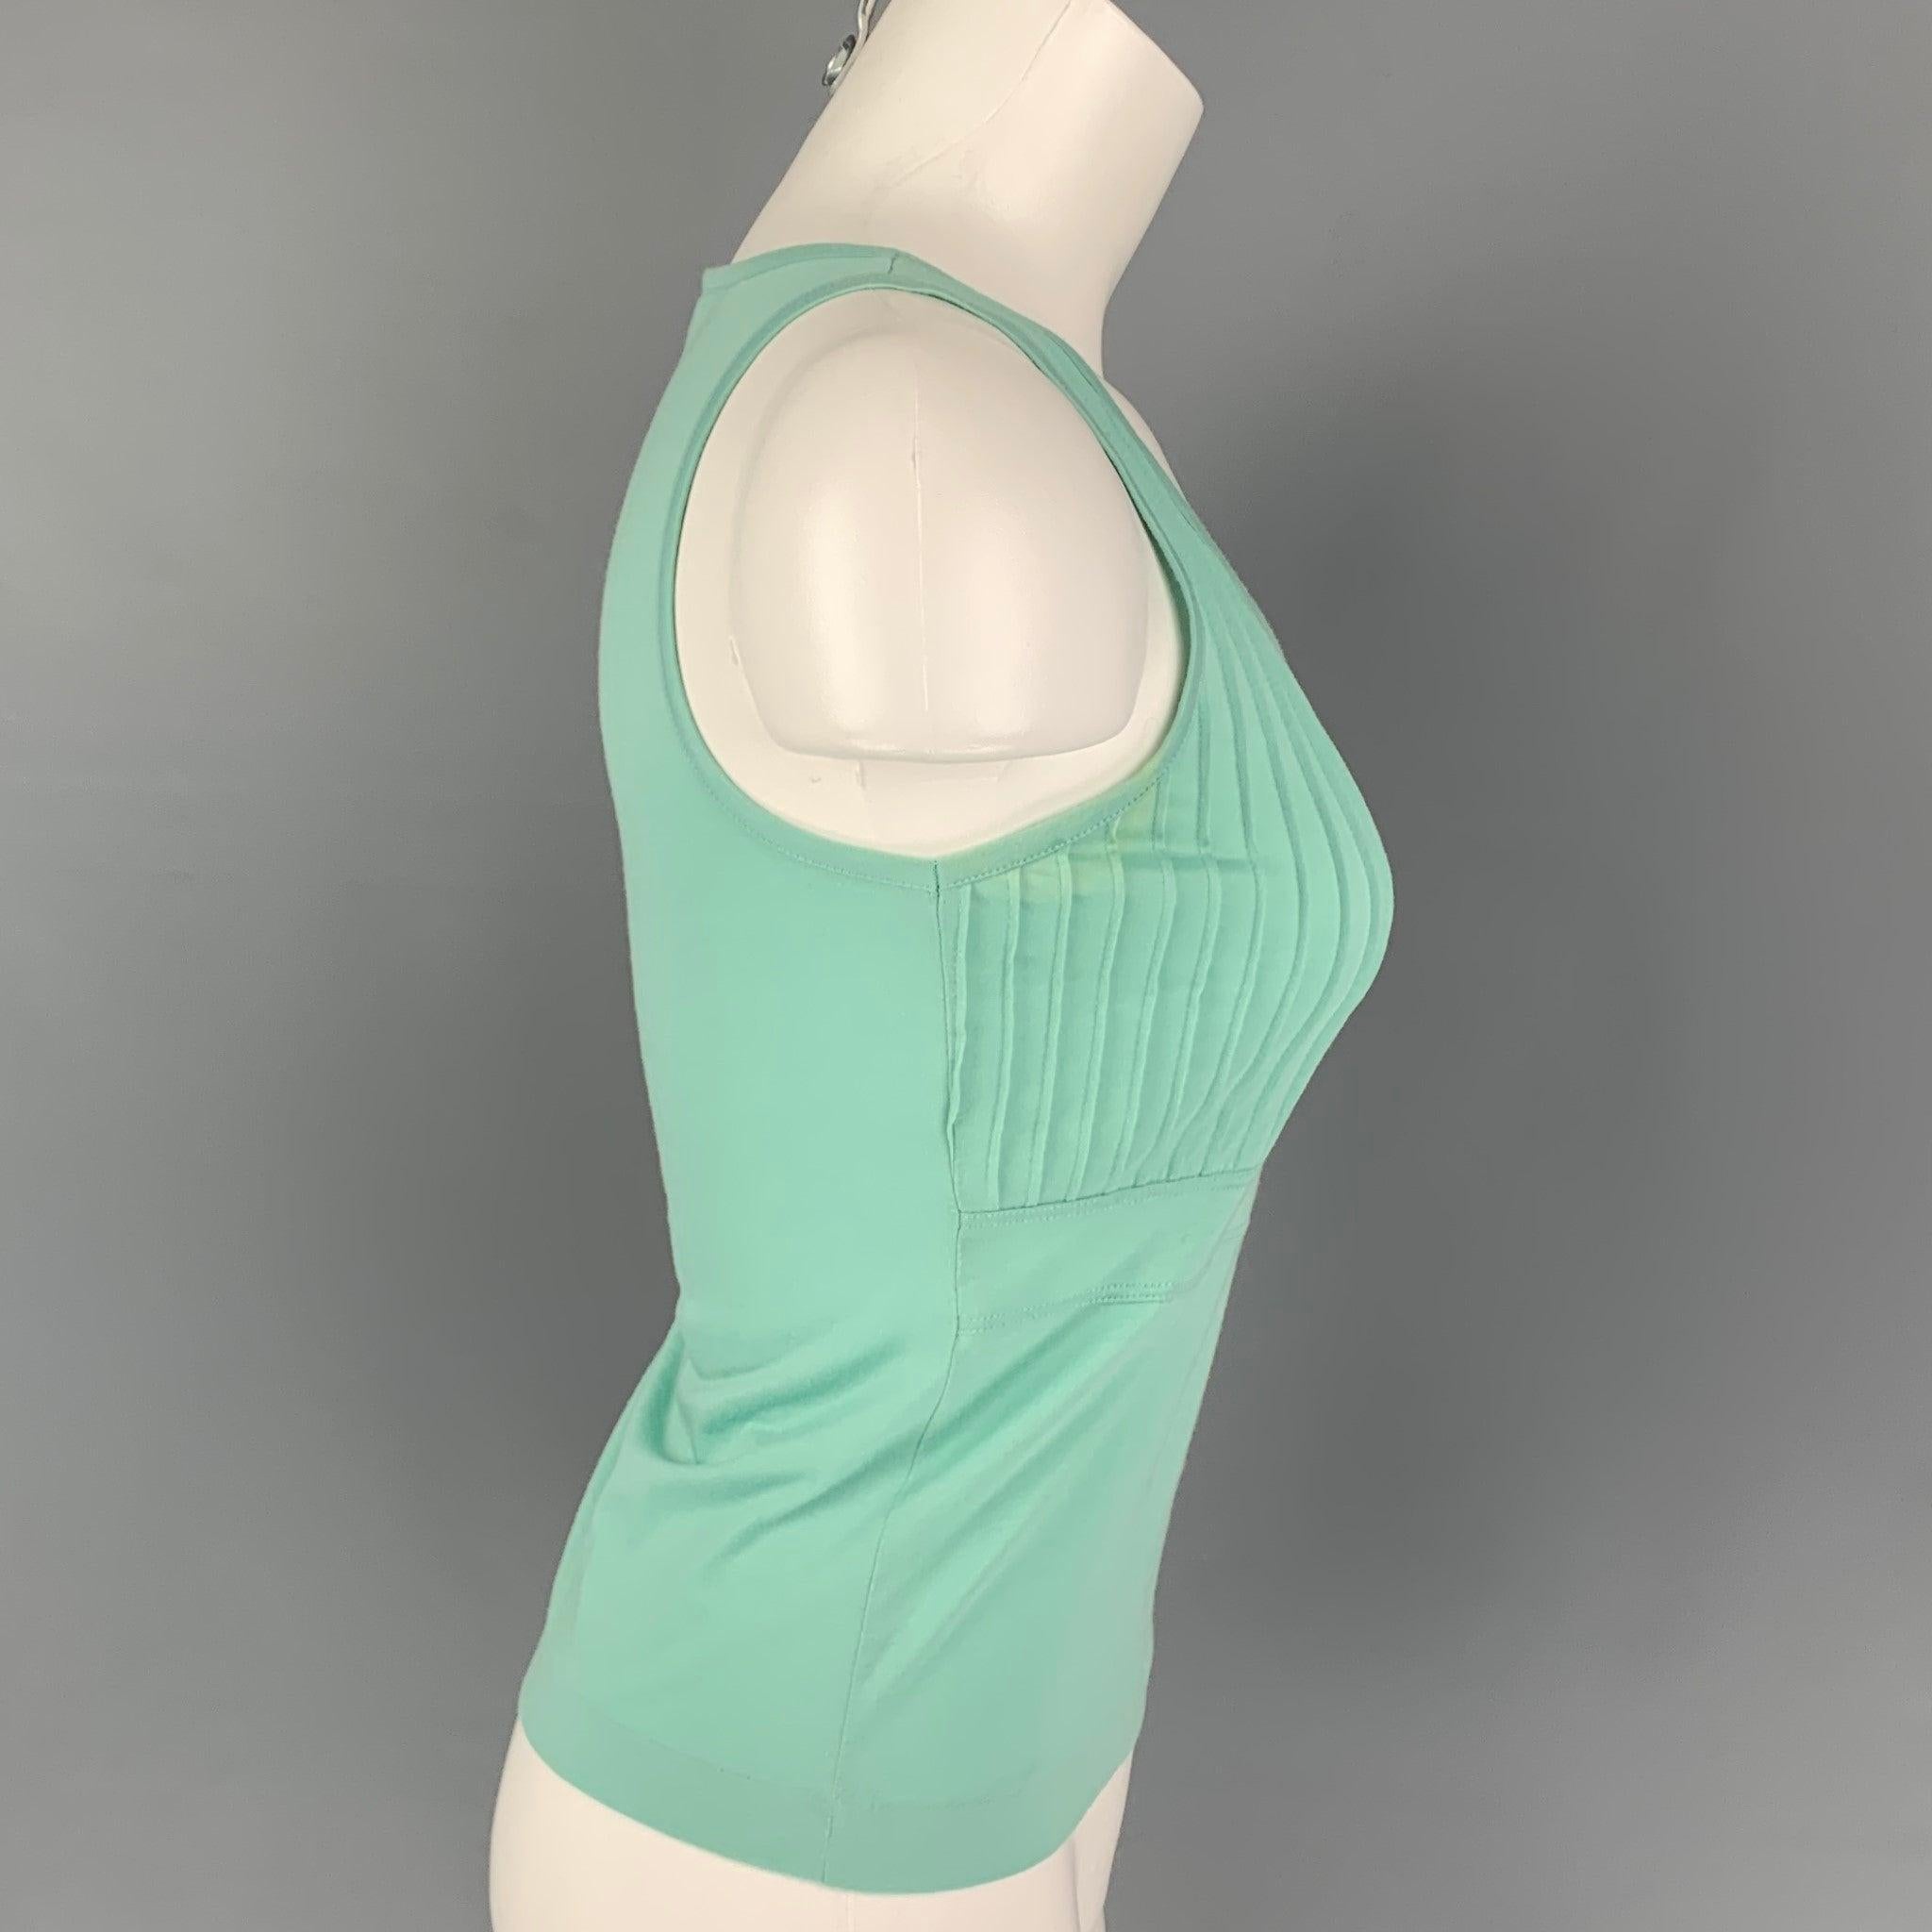 JIL SANDER tank top comes in a mint cotton / modal featuring a front pleated design. Made in Italy.
Good
Pre-Owned Condition. Moderate discoloration at under arms. As-Is.  

Marked:   S 

Measurements: 
 
Shoulder: 11 inches  Bust: 29 inches 